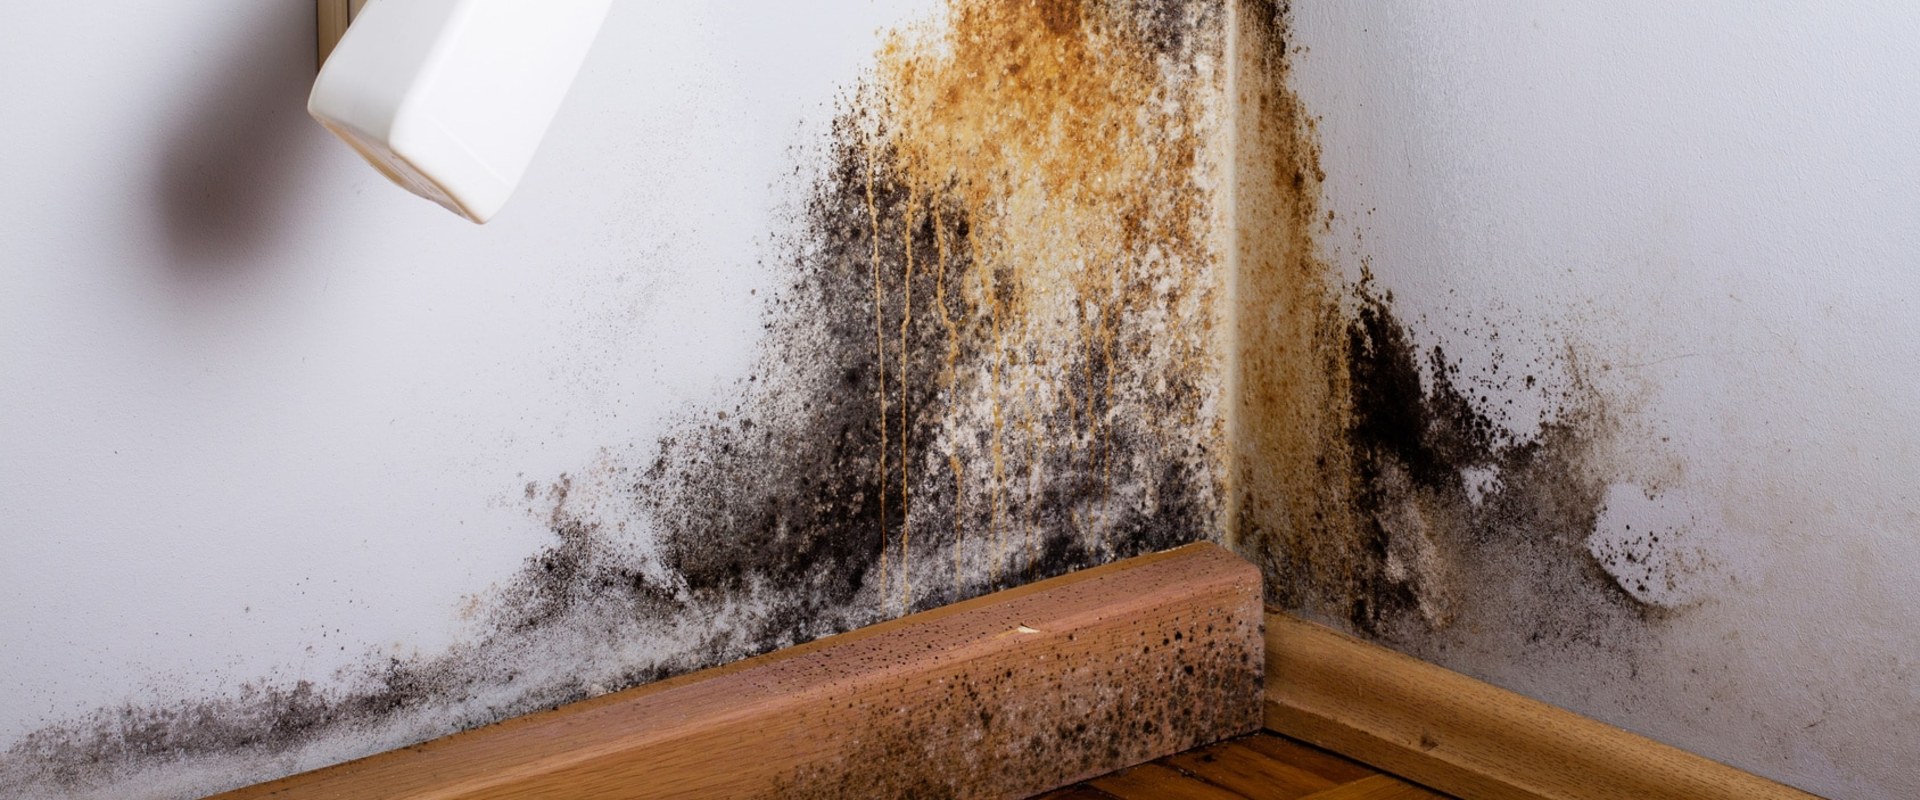 Will Mold Come Back After Remediation? Expert Advice on Prevention